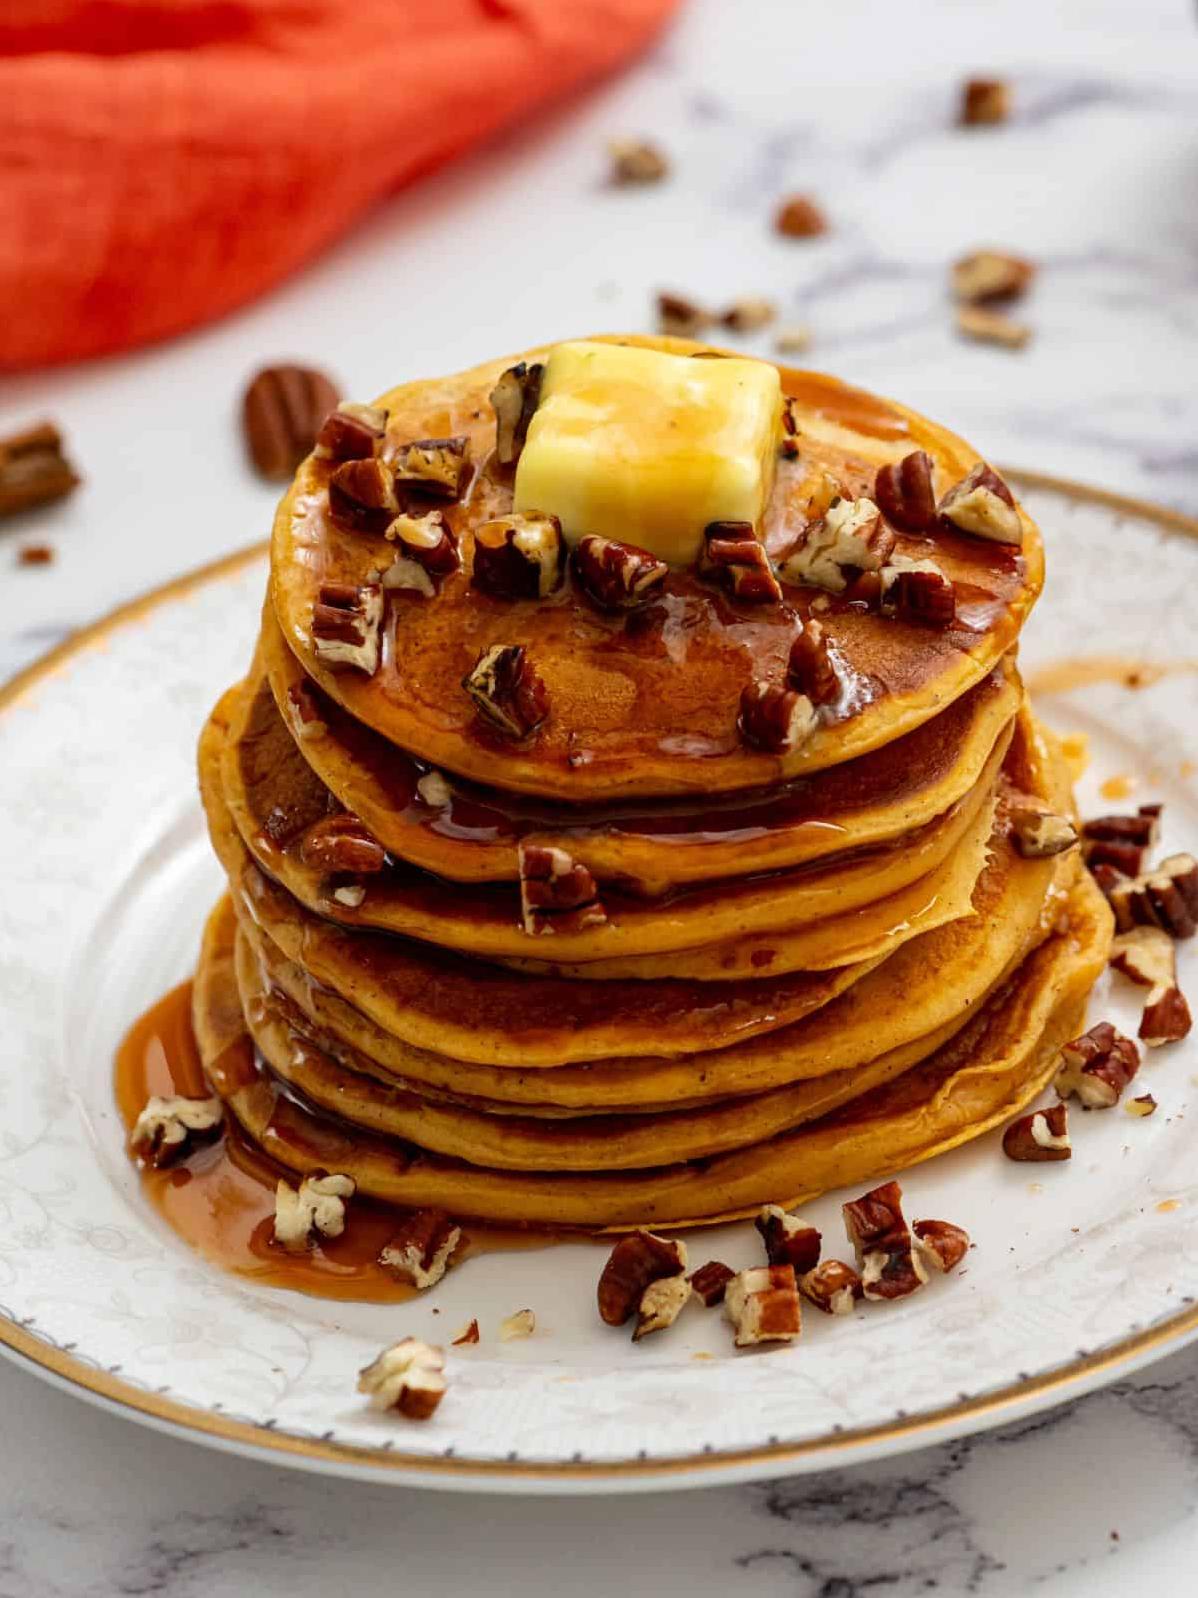  The perfect balance of sweet and savory, these pancakes are a southern-style treat.